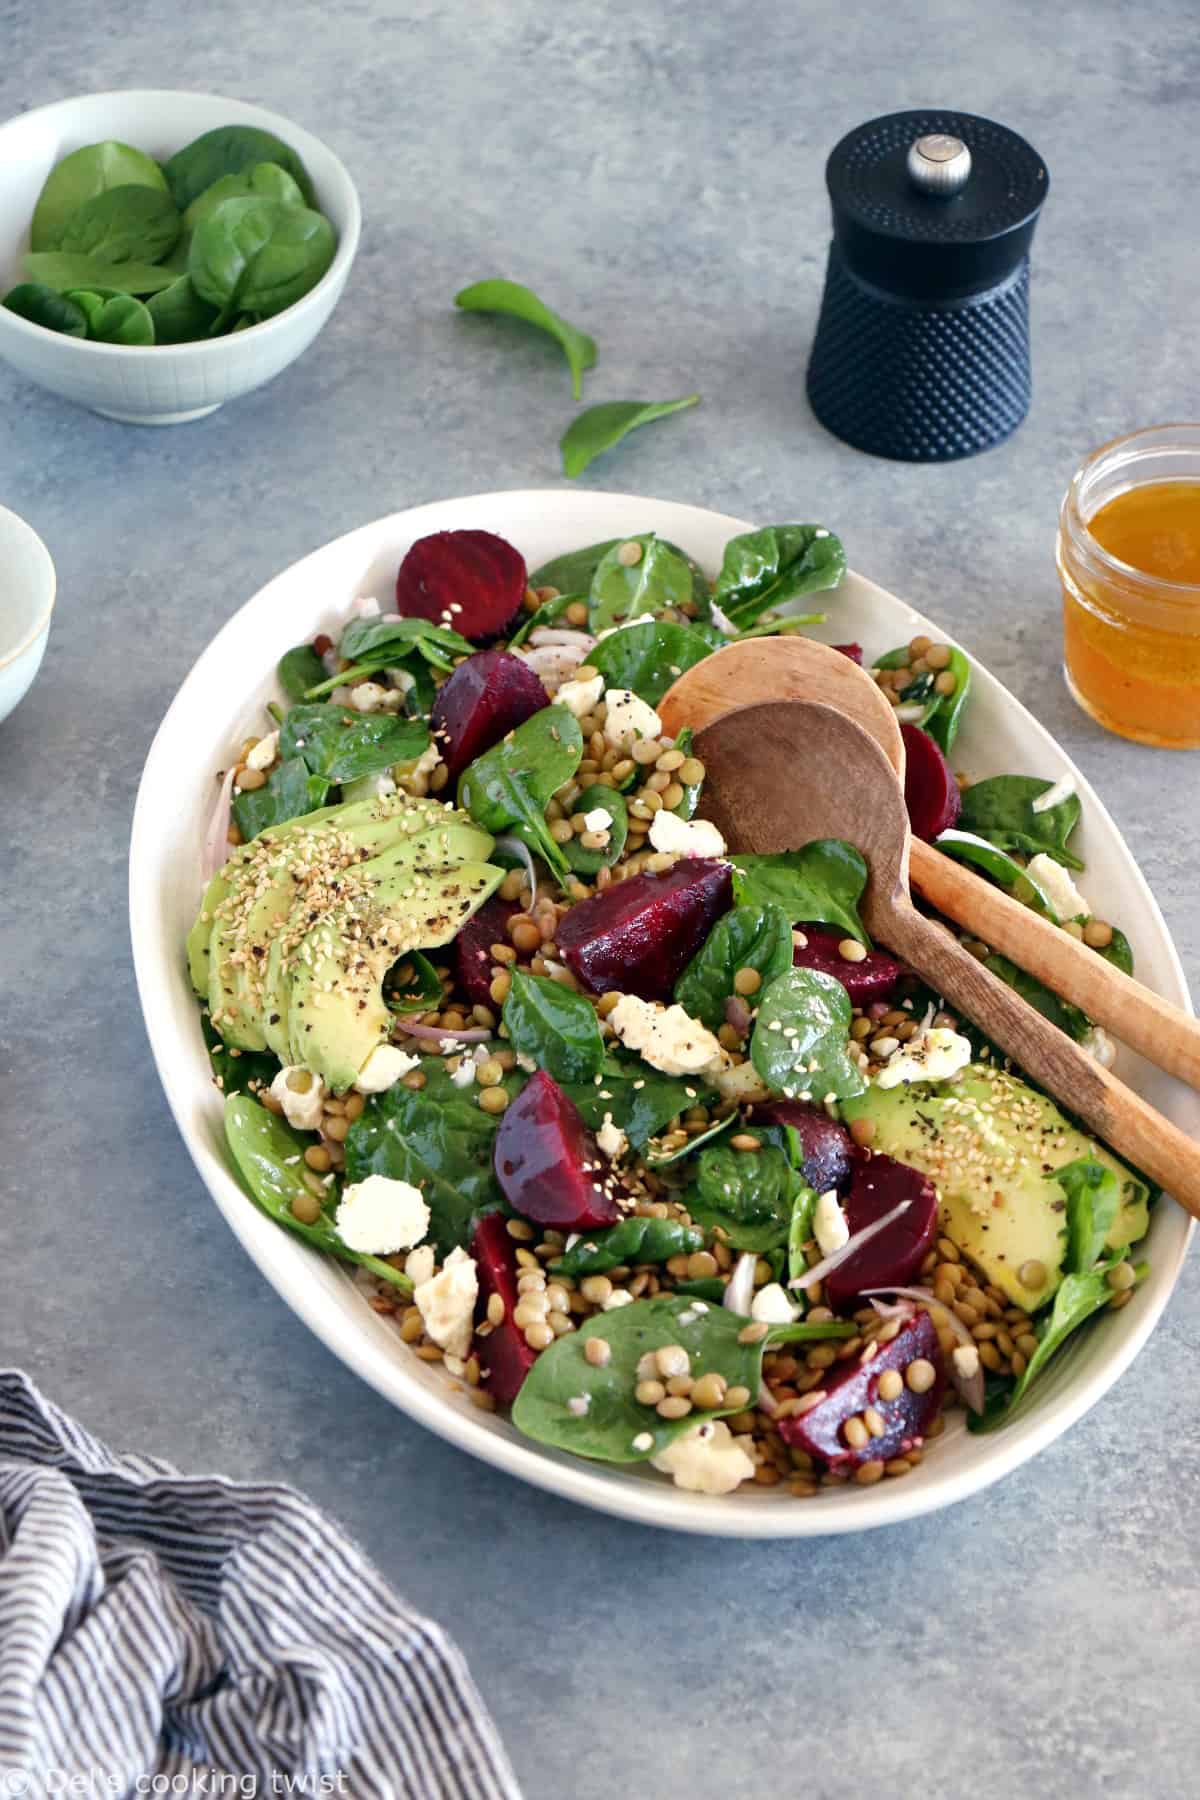 French lentil salad with beets, baby spinach and feta cheese is a nourishing healthy winter salad recipe, naturally gluten-free and easy to make.